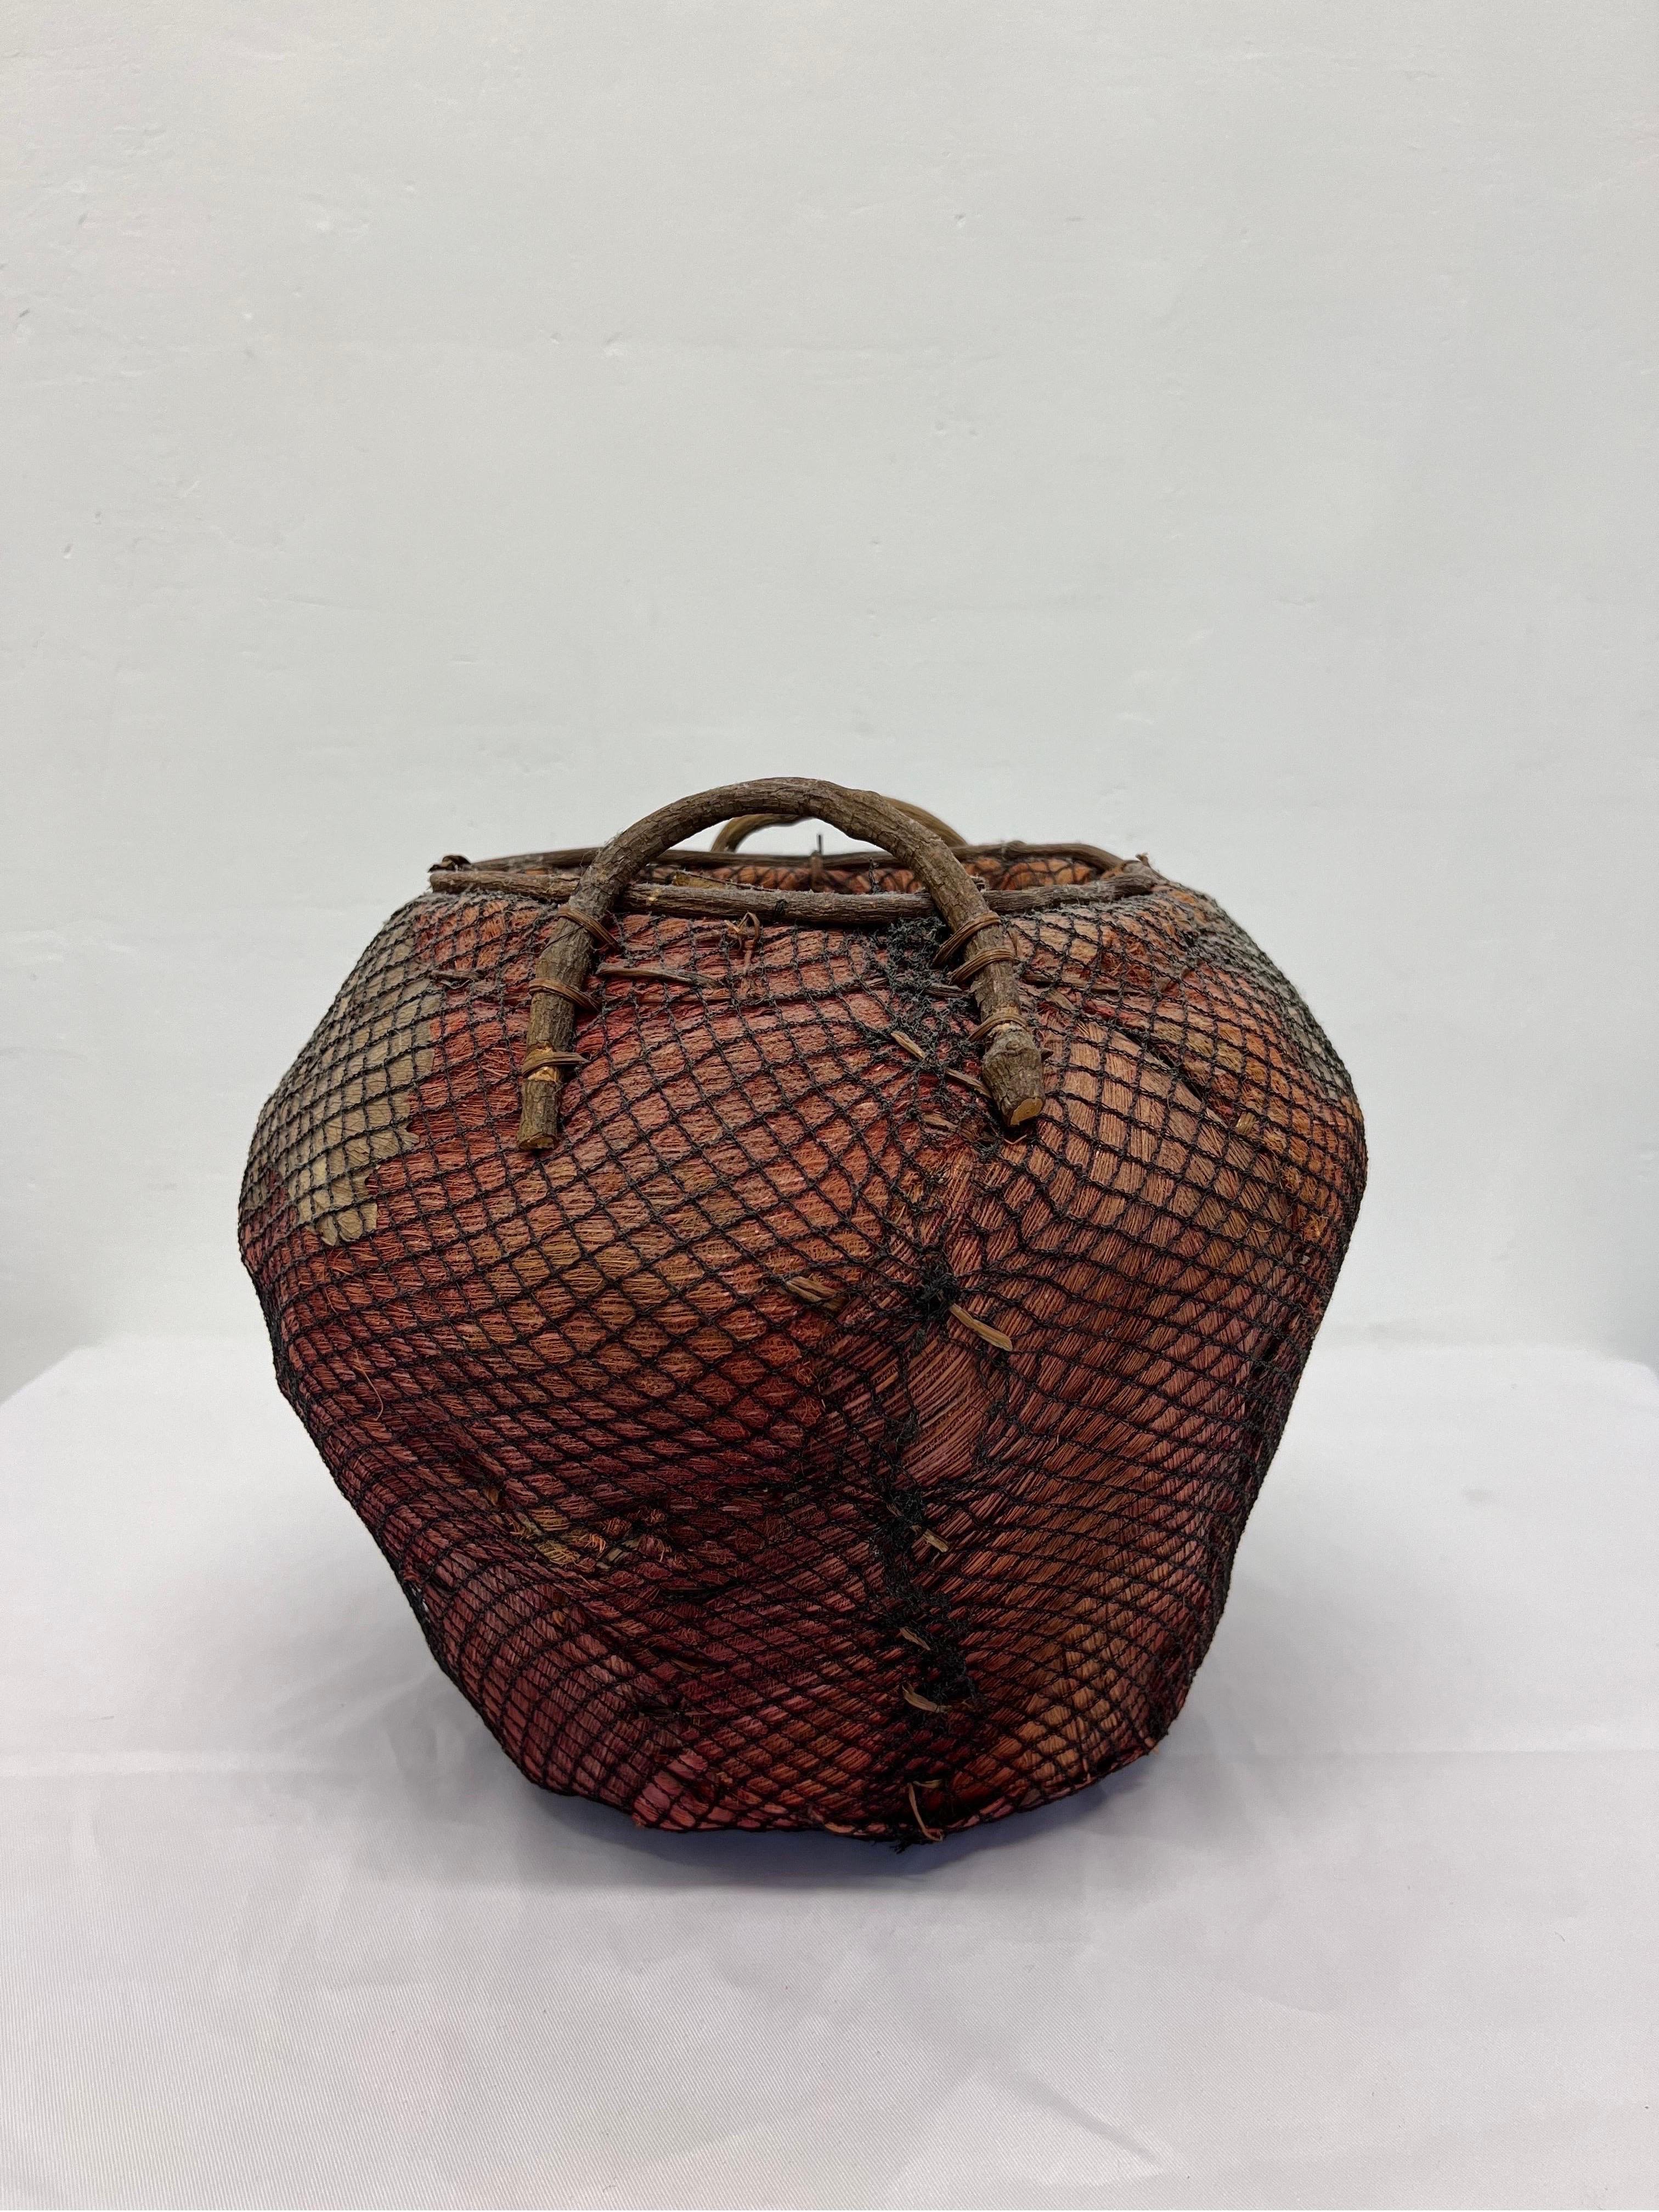 Mid-Century Modern Handmade Natural Fiber and Leaf Basket Wrapped in Fish Net, 1970s For Sale